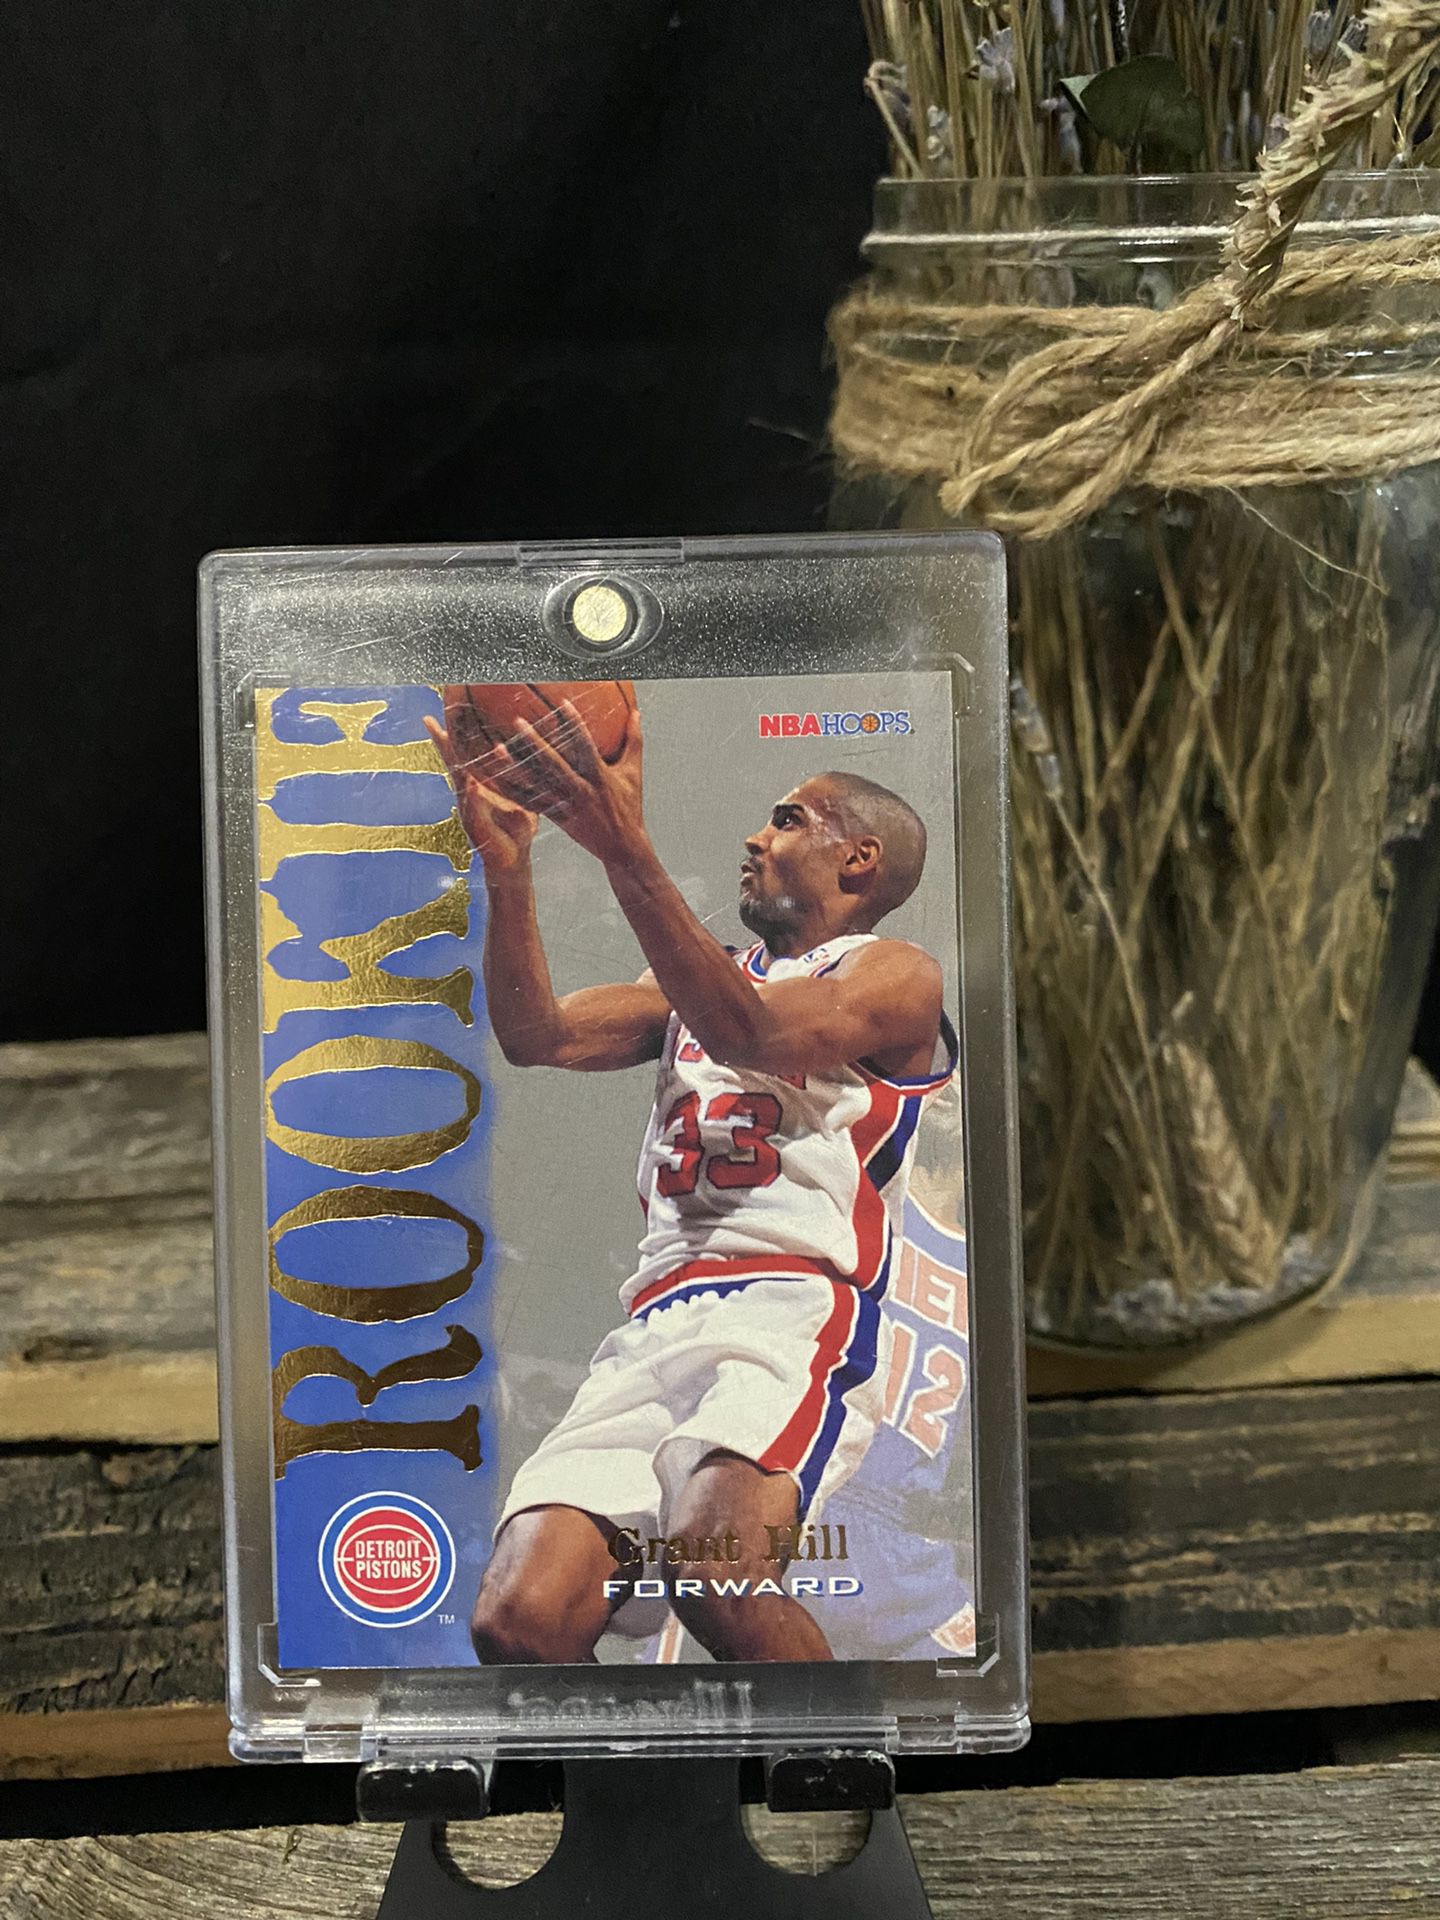 94 SKYBOX Grant Hill Rookie 10 for Sale in Norwalk, CA - OfferUp